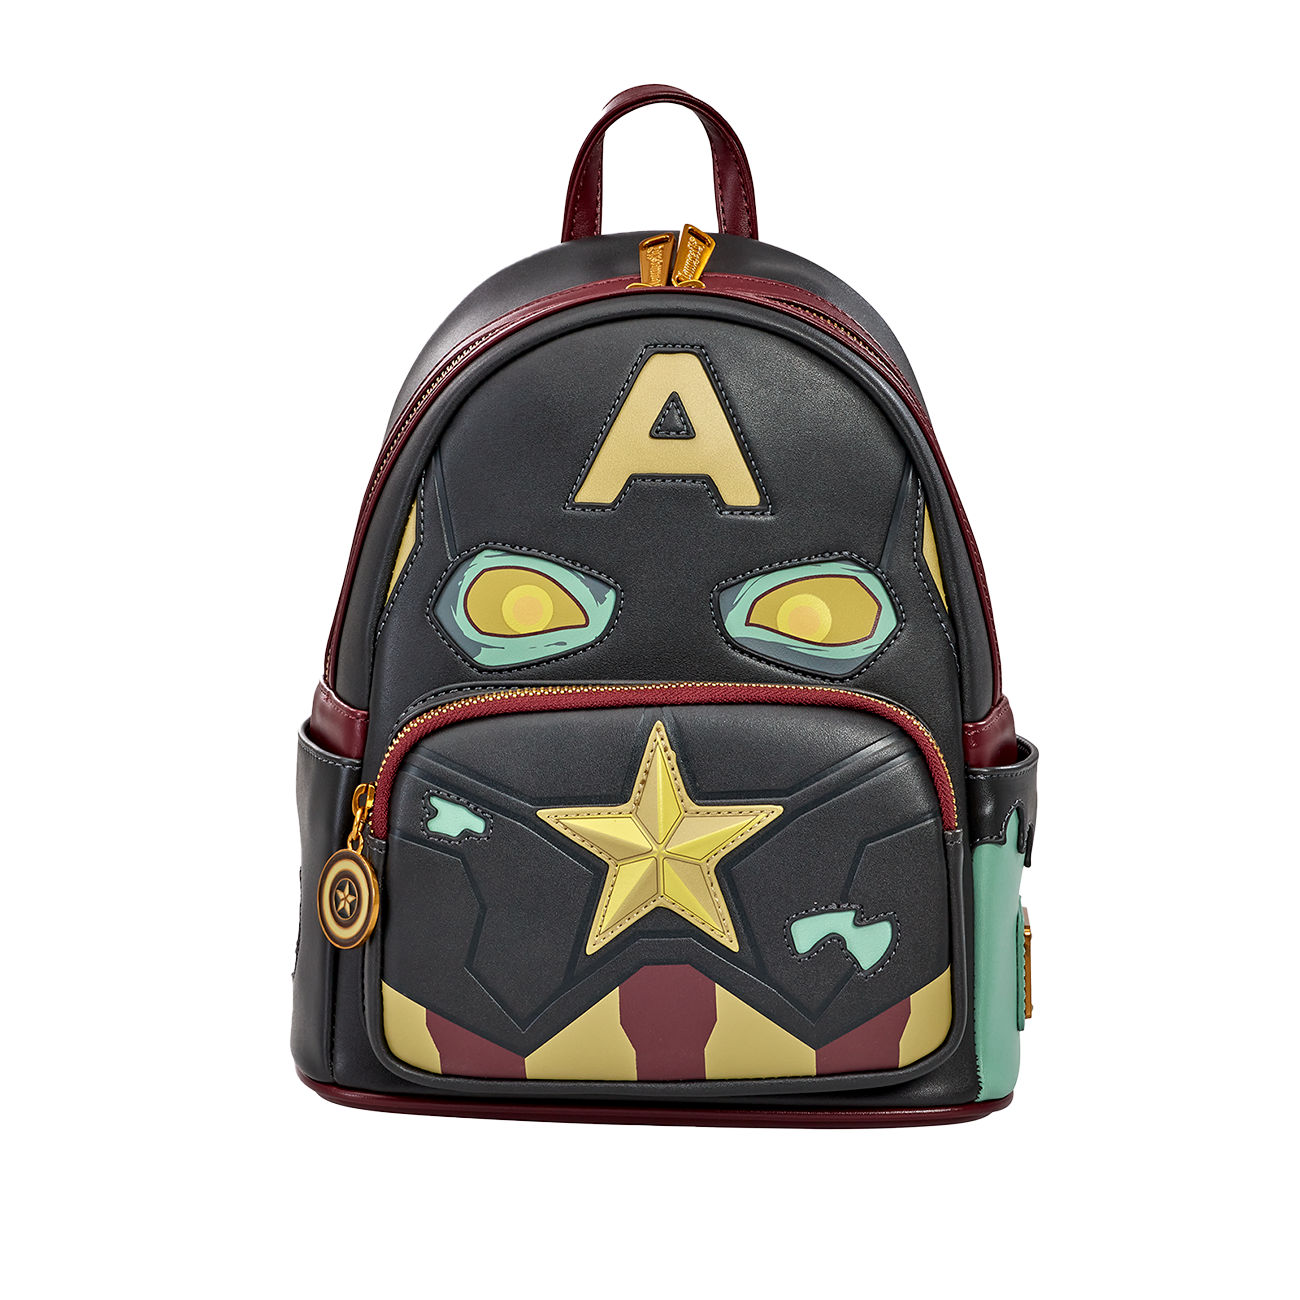 LOUNGEFLY Zombie Captain America Backpack - Marvel